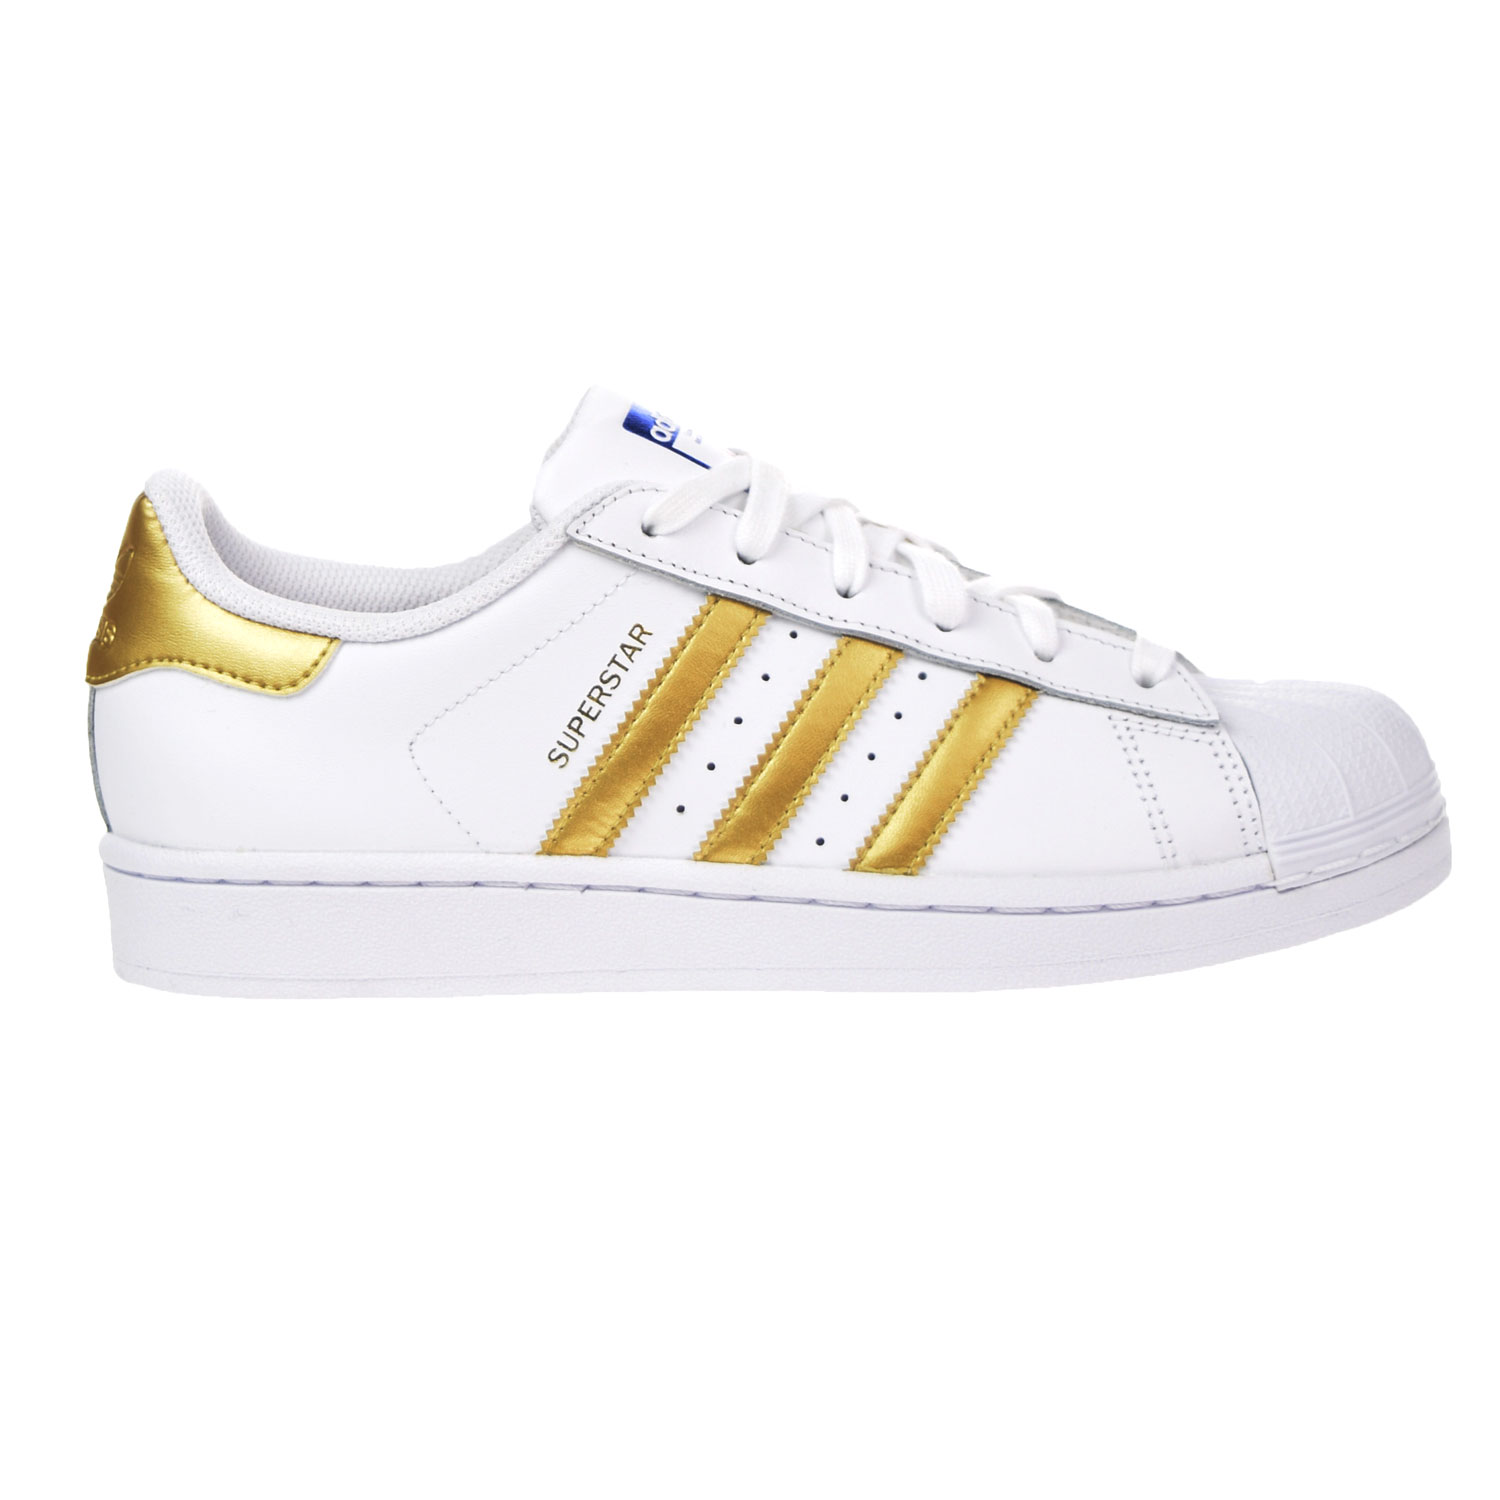 adidas superstar white and gold